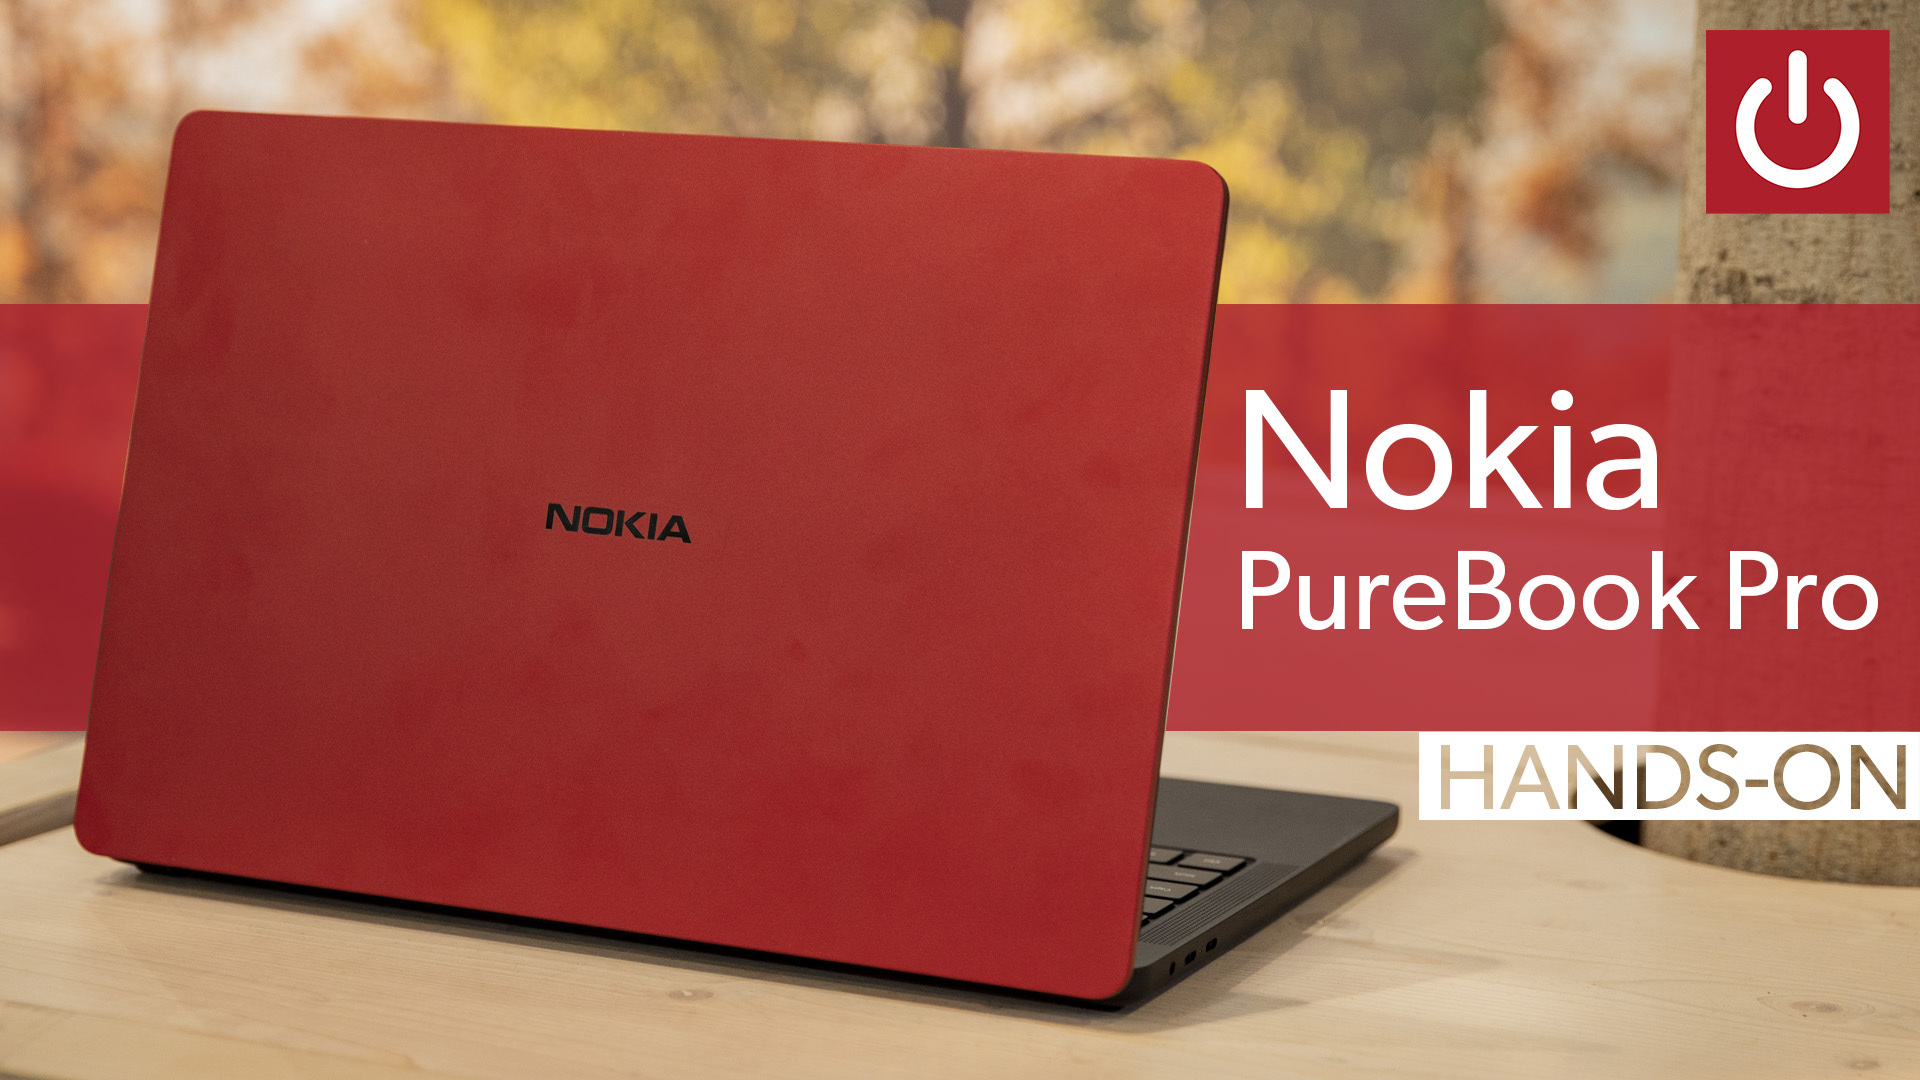 The Nokia attach is coming to low-cost laptops, and we received our hands on one